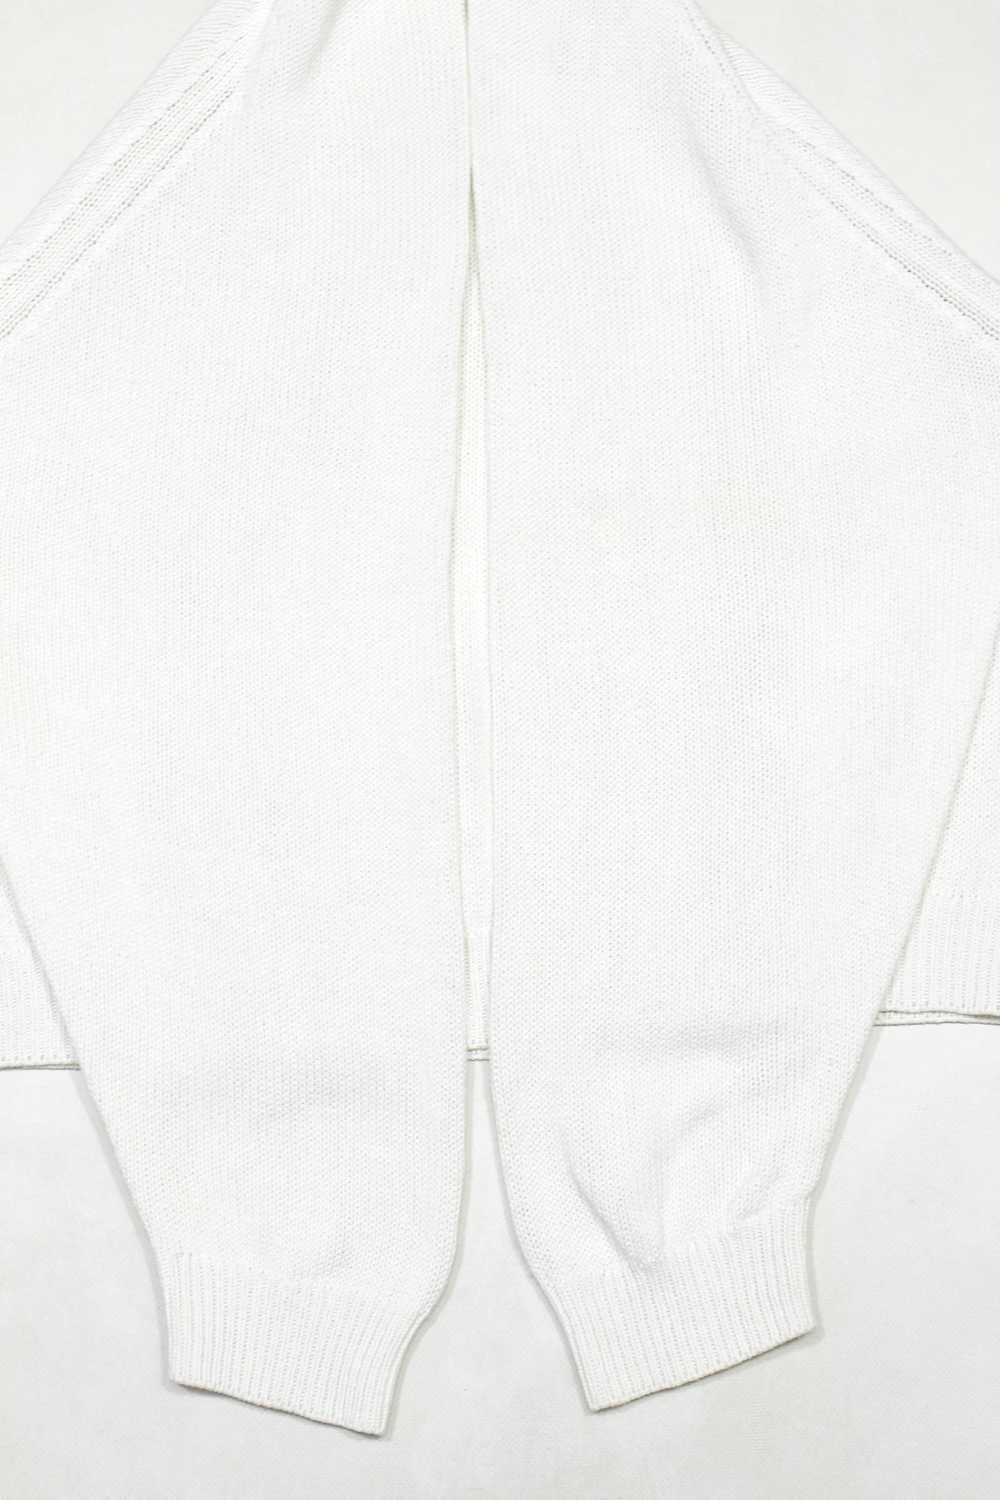 Lacoste 90S Big Logo Embroidered Sweater Vintage … - image 6